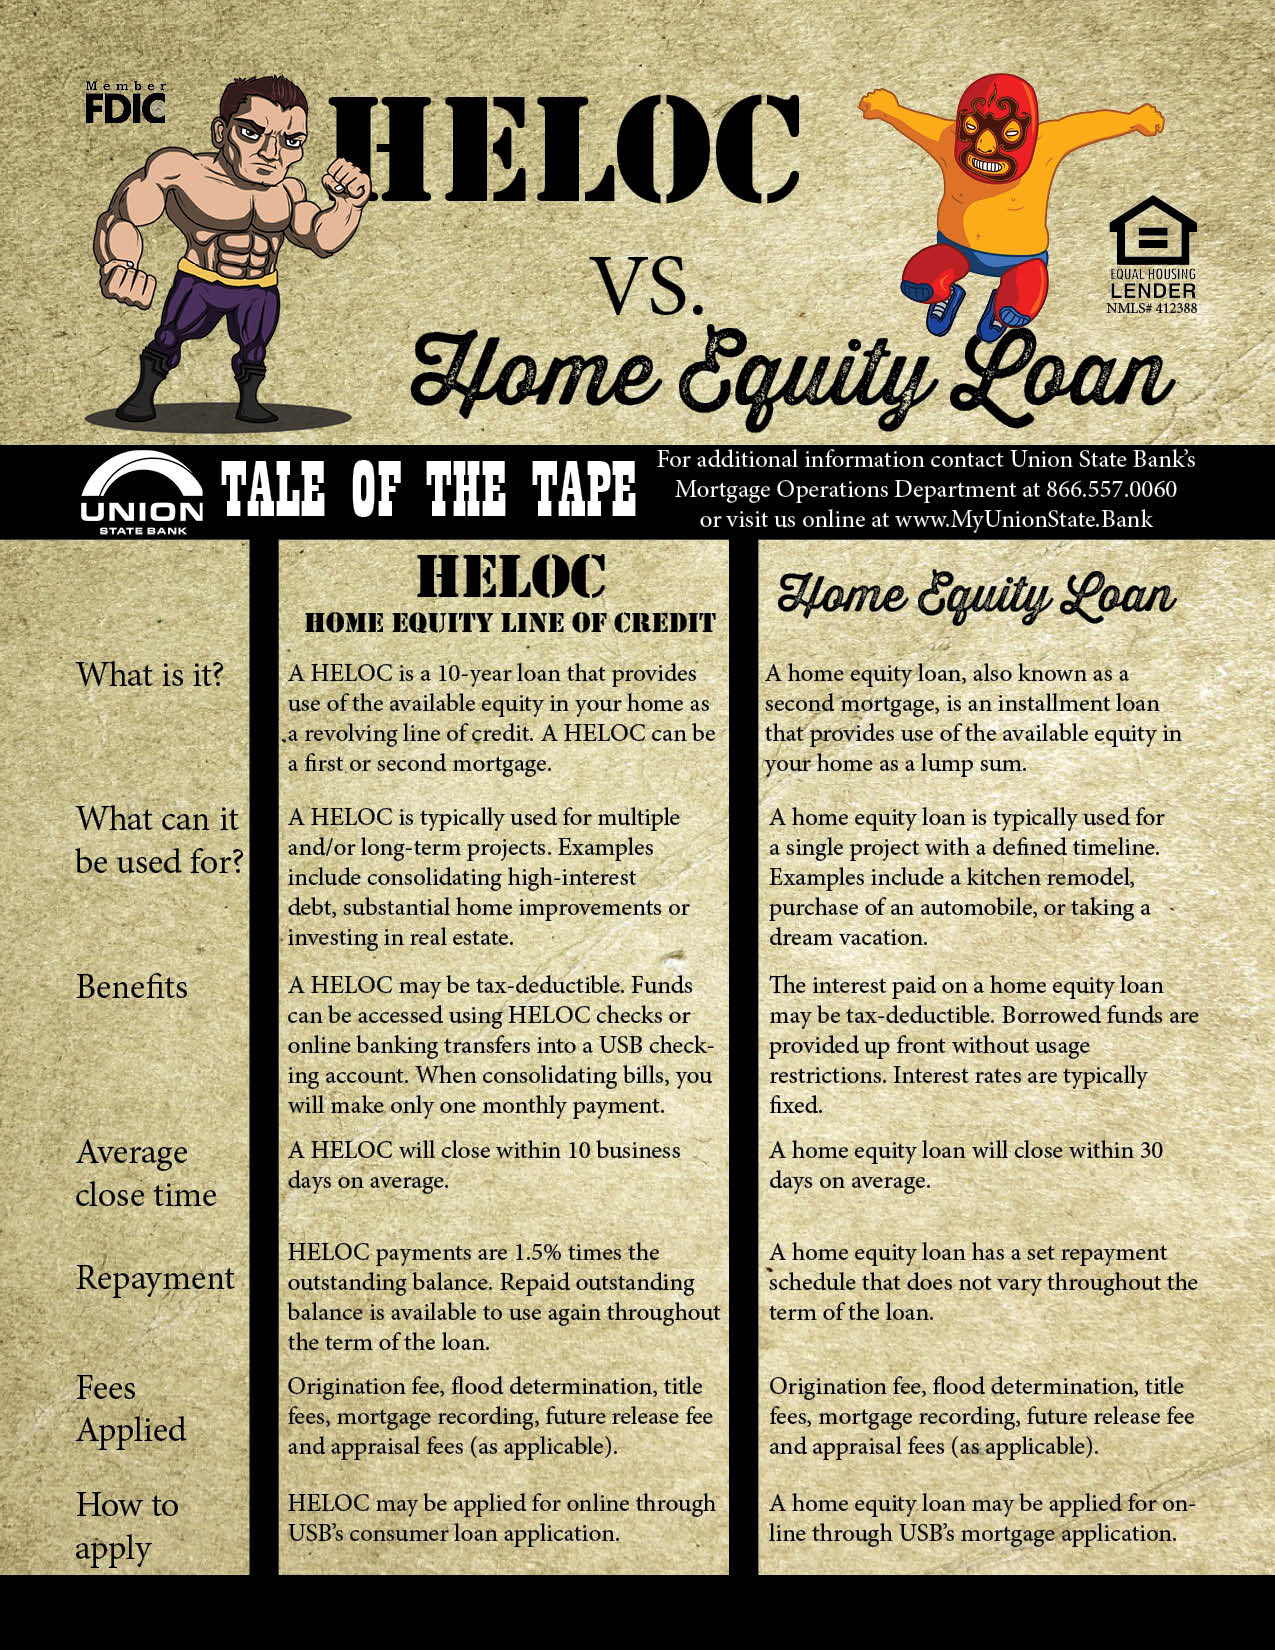 Home Equity Line of Credit (HELOC) vs. home equity loan

Accessibility Statement for Image Document Pages

Union State Bank is committed to ensuring digital accessibility for people with disabilities. We are continually improving the user experience for everyone, and applying the relevant accessibility standards.

The Web Content Accessibility Guidelines (WCAG) defines requirements for designers and developers to improve accessibility for people with disabilities. It defines three levels of conformance: Level A, Level AA, and level AAA. Union State Bank is partially conformant with WCAG2.0 level AA. Partially conformant means that some parts of the content do not fully conform to the accessibility standard. Such as the image document on this page, which may not be accessible through online readers.

For accessibility assistance with this document or to provide feedback on the accessibility of the Union State Bank website contact us:
·         Phone: 866-557-0060
·         E-mail: customercare@myunionstate.bank
·         Postal address: PO Box 928, Arkansas City KS 67005